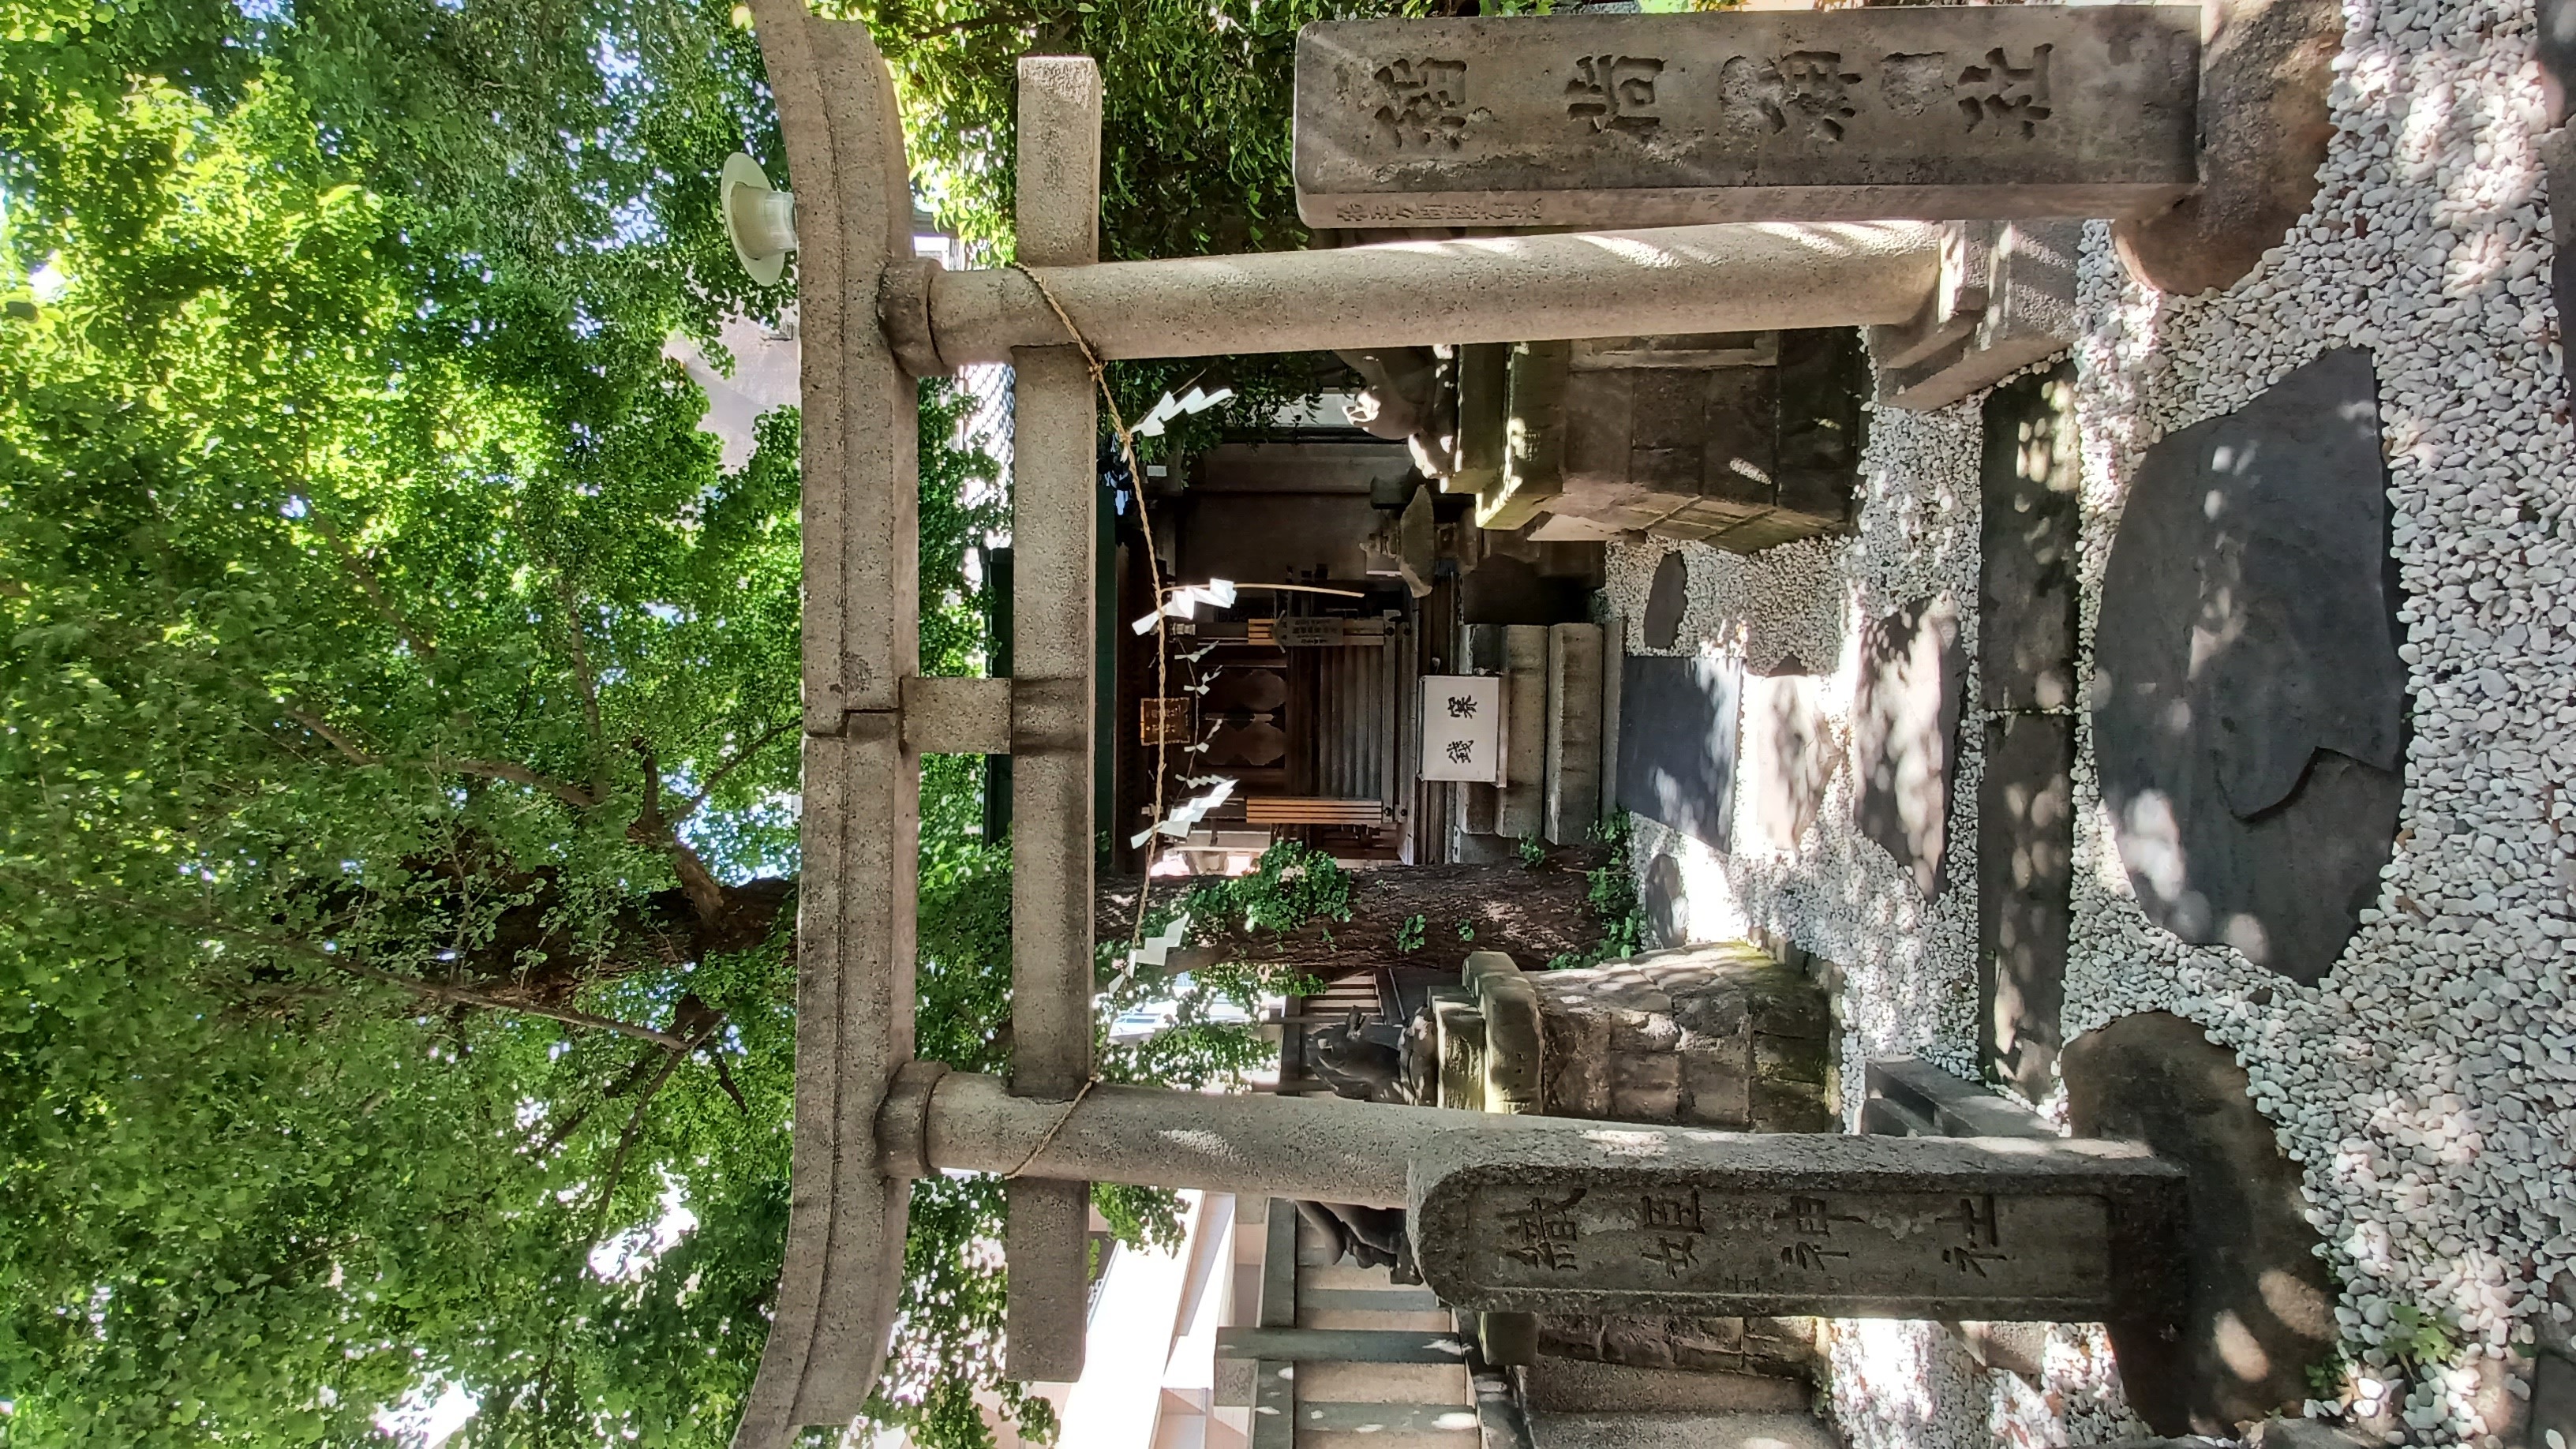 A grey torii (Japanese-style) gate standing in front of a sub-shrine building. There are two high stones with Japanese symbols on them next to the gate.